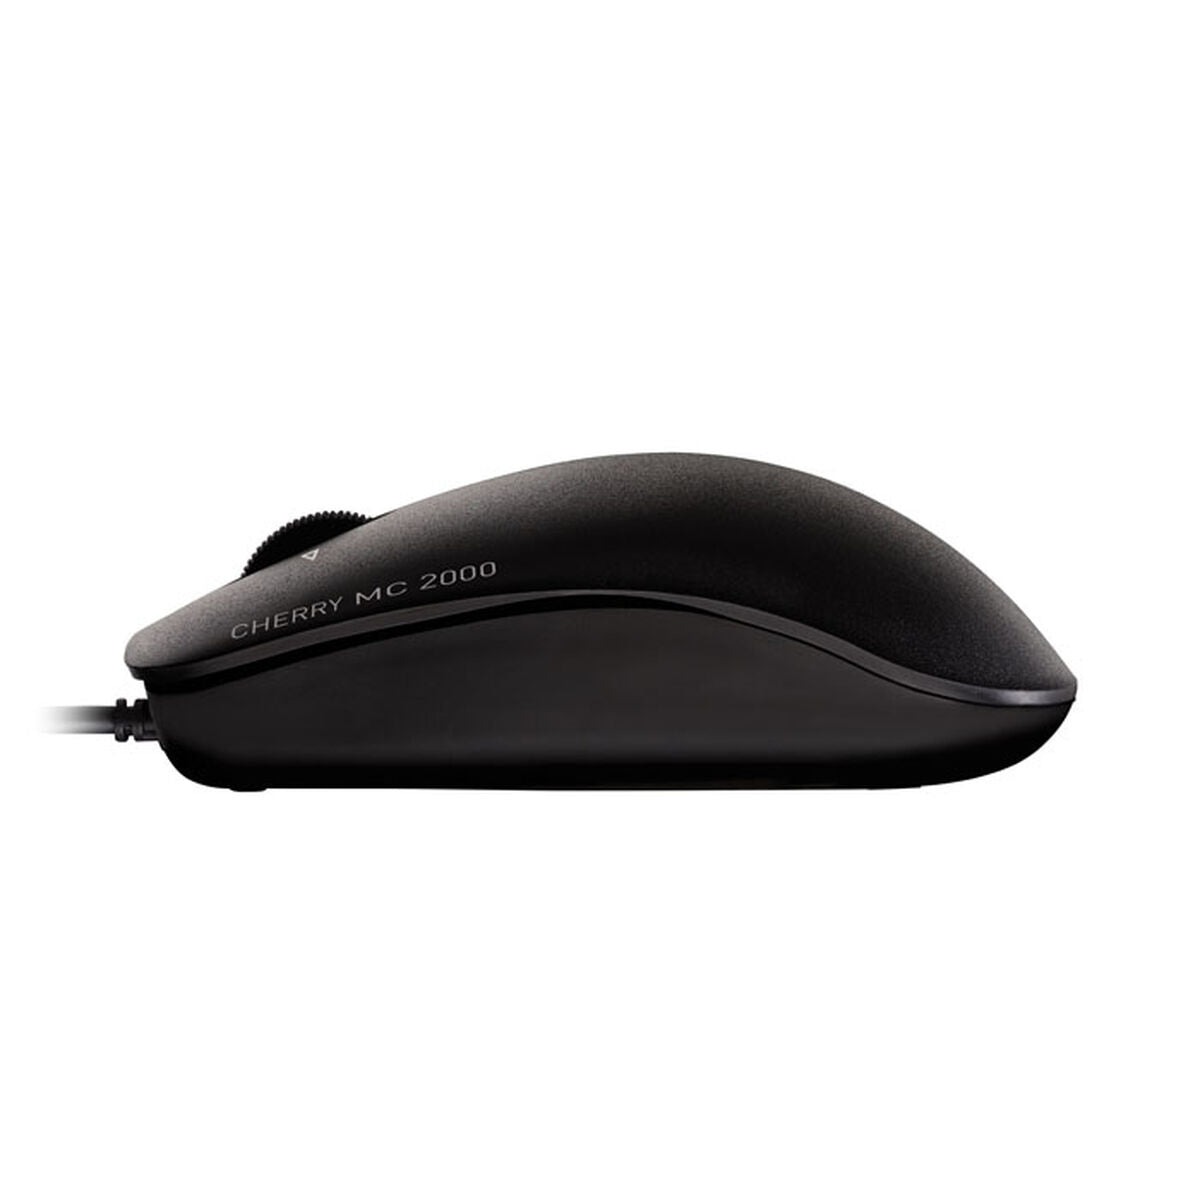 Mouse Cherry JM-0600-2, Cherry, Computing, Accessories, mouse-cherry-jm-0600-2, Brand_Cherry, category-reference-2609, category-reference-2642, category-reference-2656, category-reference-t-19685, category-reference-t-19908, category-reference-t-21353, computers / peripherals, Condition_NEW, office, Price_20 - 50, RiotNook